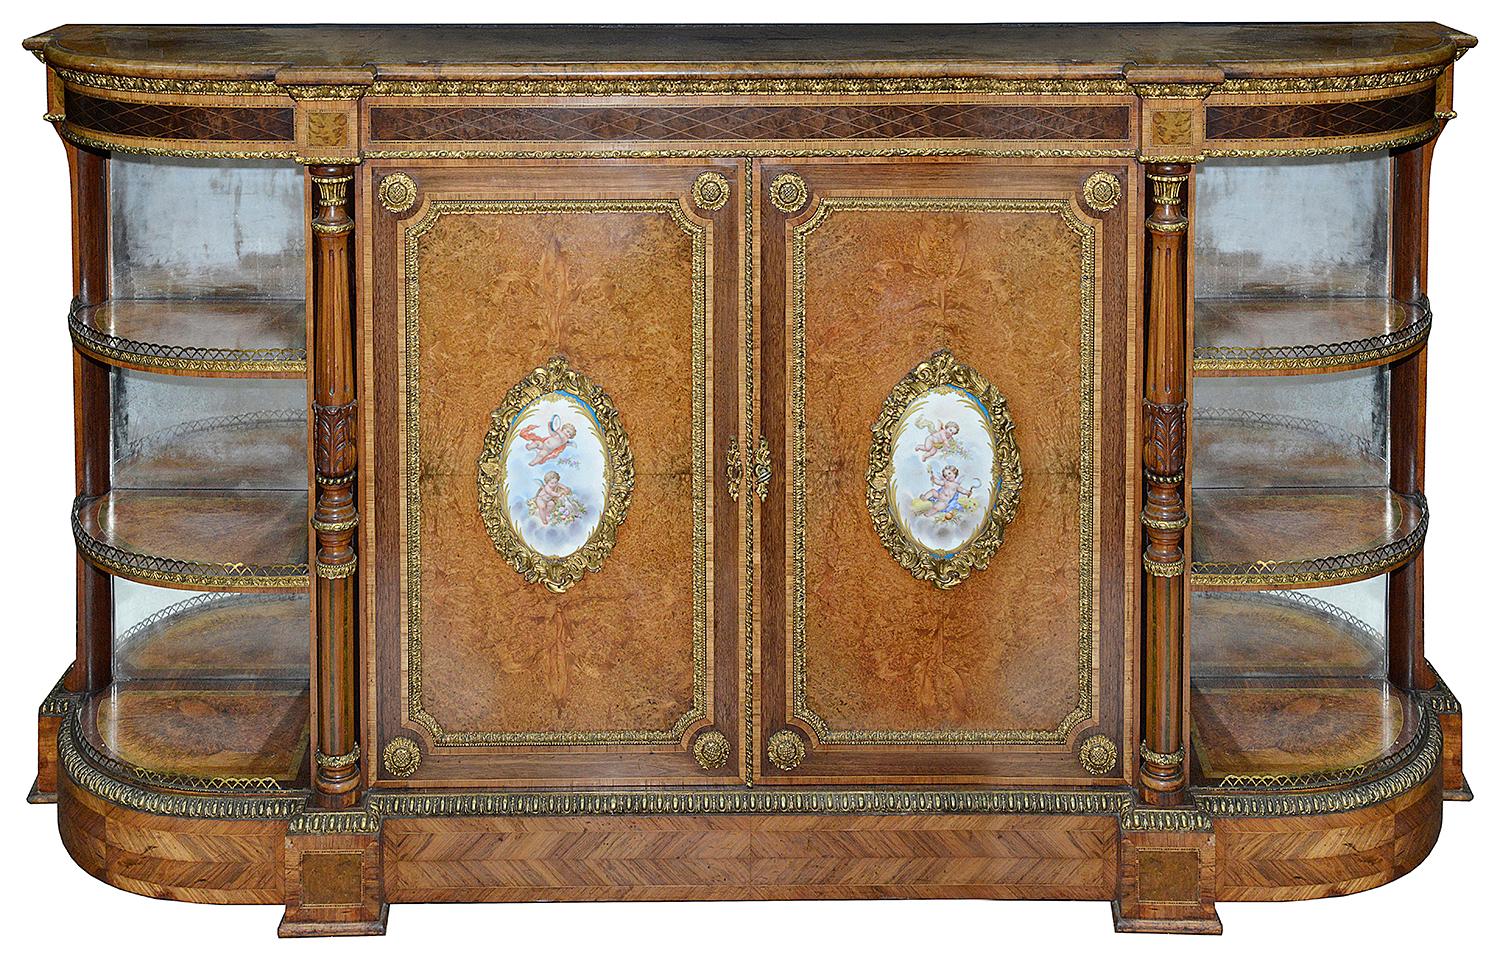 A very good quality pair of 19th century Sèvres mounted amboyna credenzas, having wonderful ormolu mounts, cross banded in Kingwood, carved columns and mirror backed open shelves to the sides.